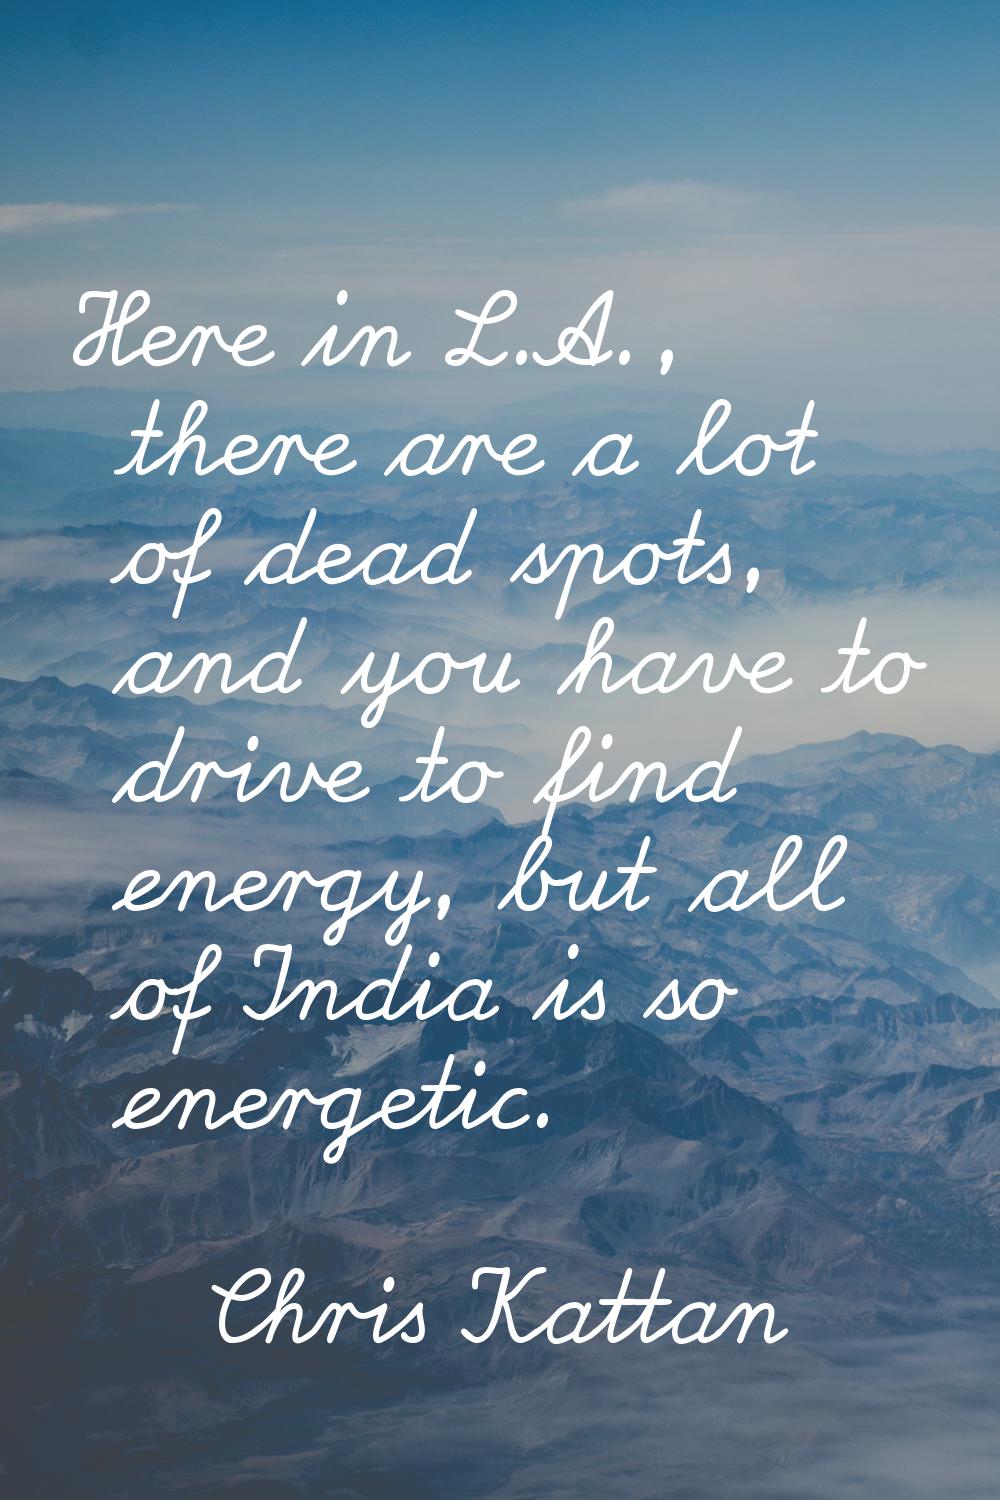 Here in L.A., there are a lot of dead spots, and you have to drive to find energy, but all of India